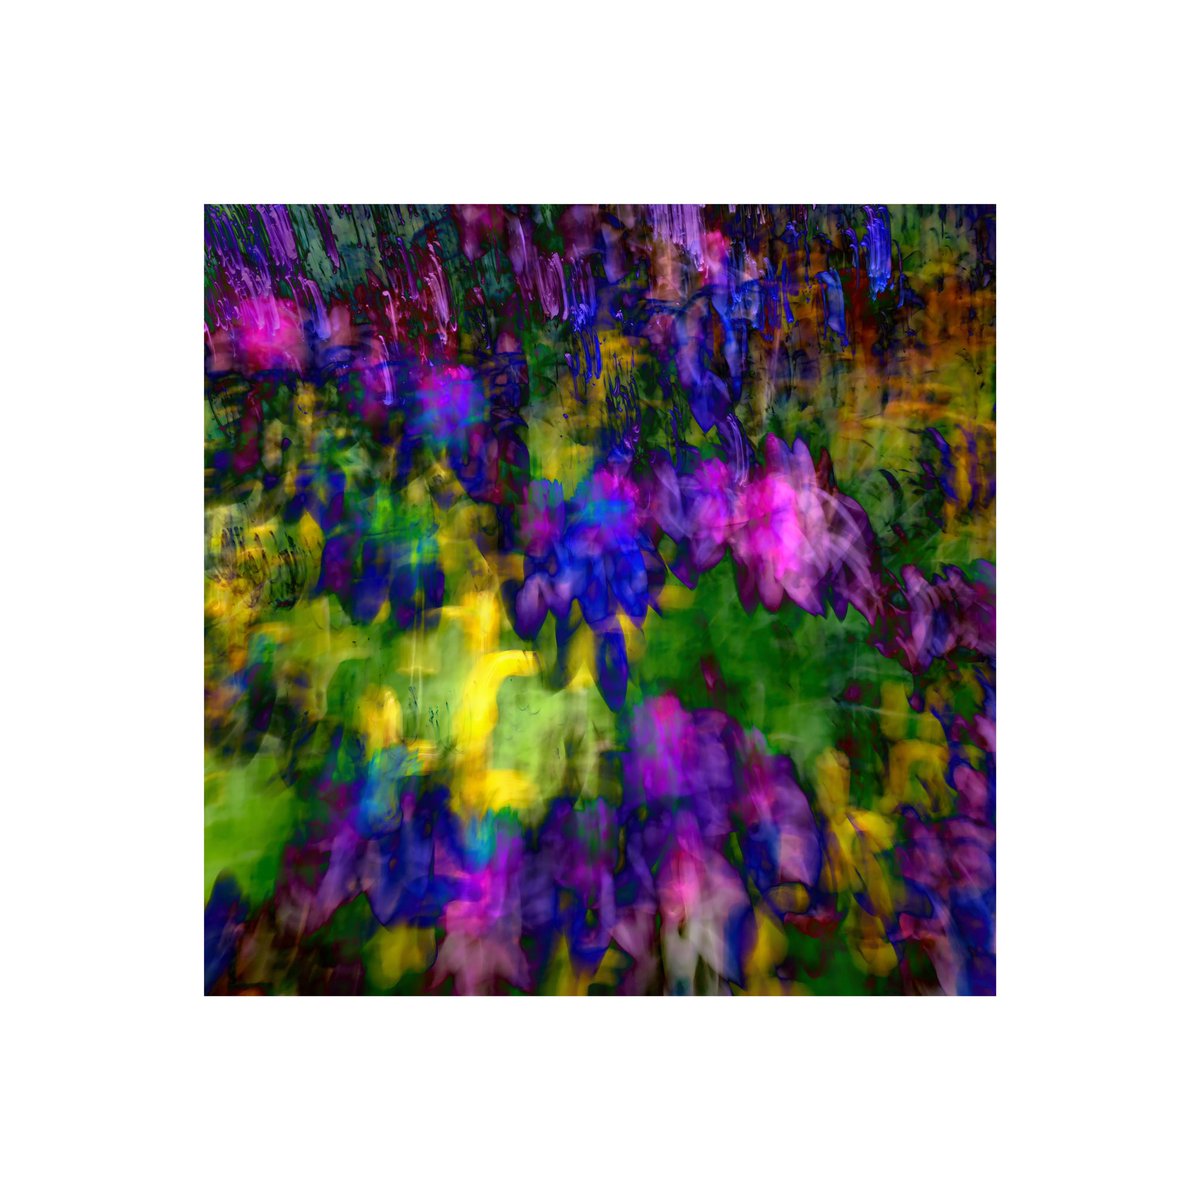 Day 153 365 days of ICM photography 
#icmphotography #icm #intentionalcameramovement #abstractphotography #abstract #icmphoto #icmphotomag #impressionistphotography #bluronpurpose #camerapainting #365in2023